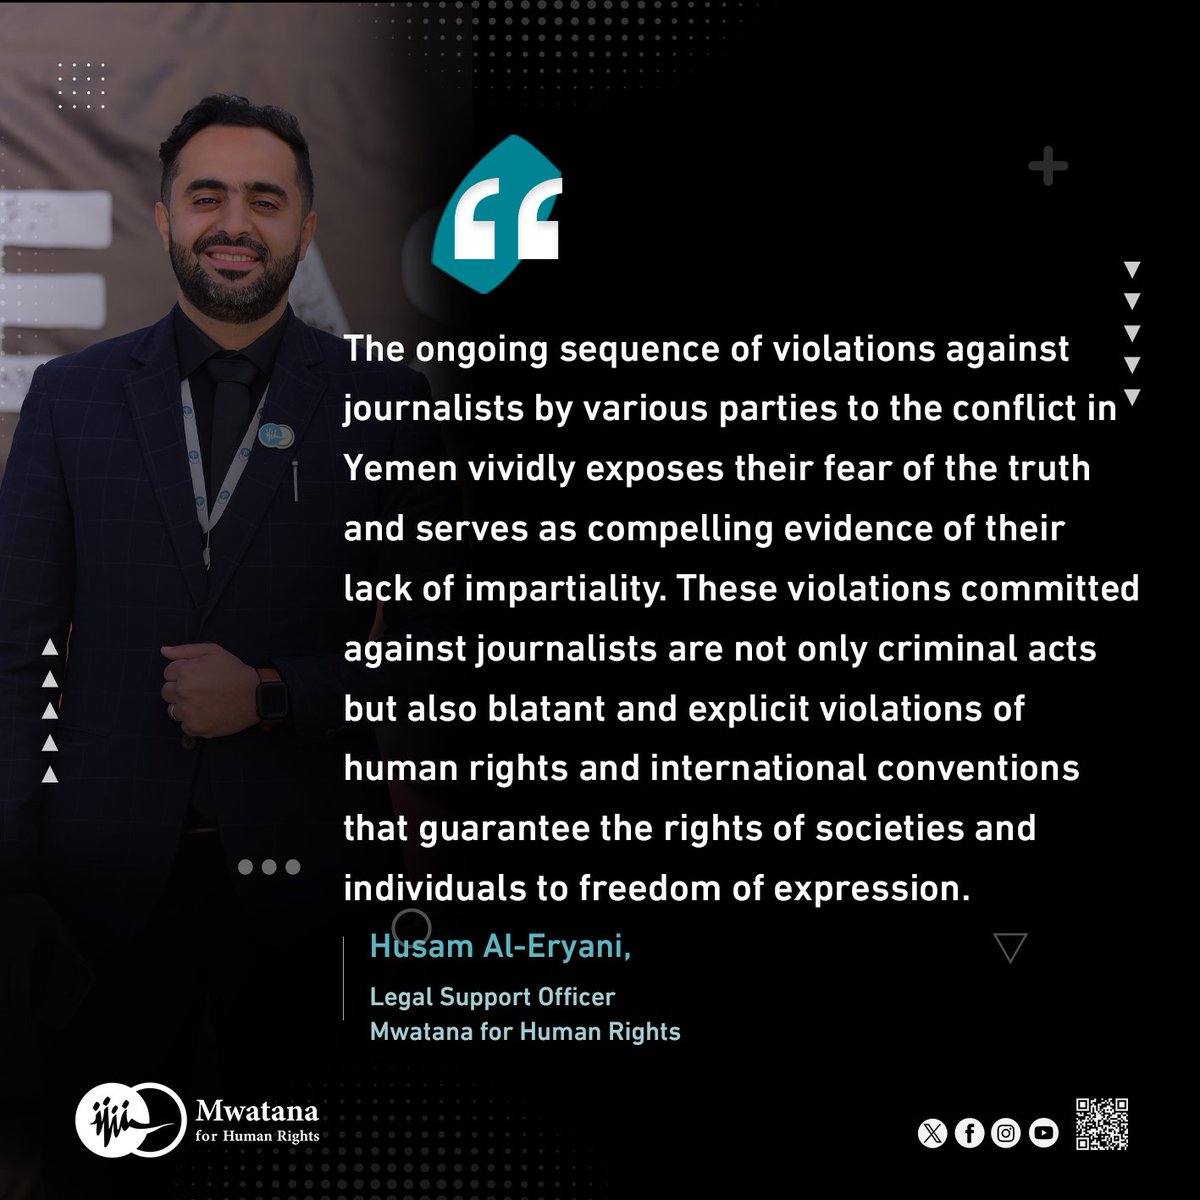 The ongoing sequence of #violations against #journalists by various parties to the conflict in #Yemen vividly exposes their fear of the #truth and serves as compelling evidence of their lack of impartiality. These violations committed against journalists are not only criminal